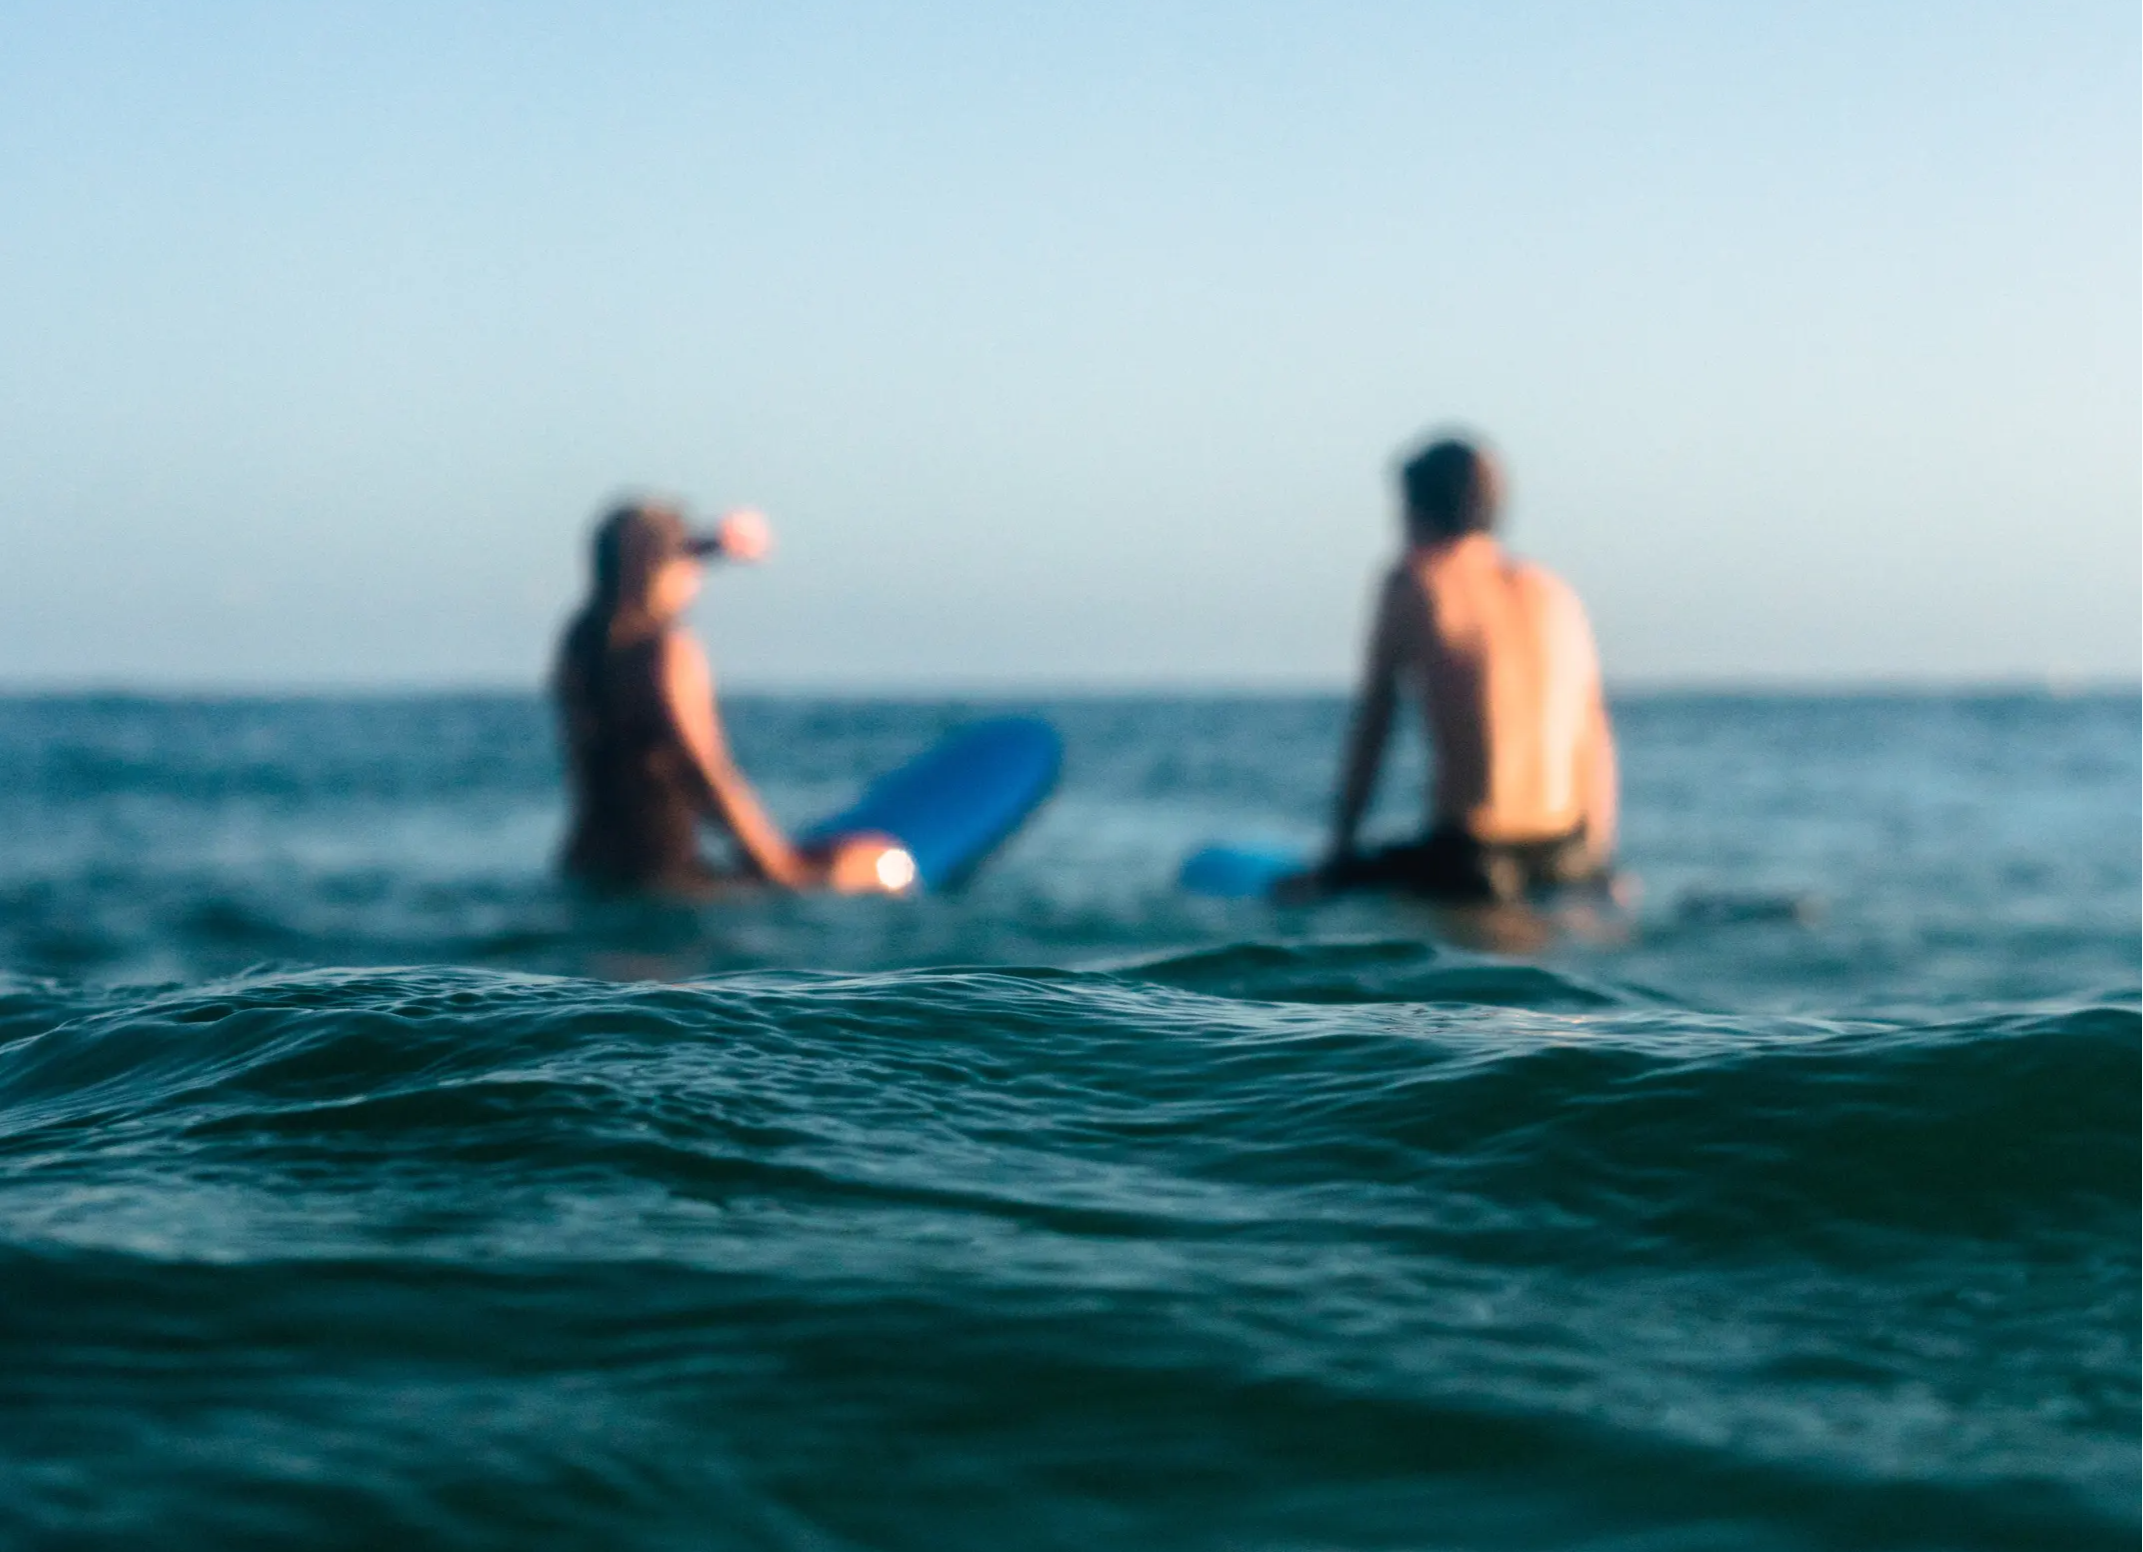 adventurous date with two people surfing together